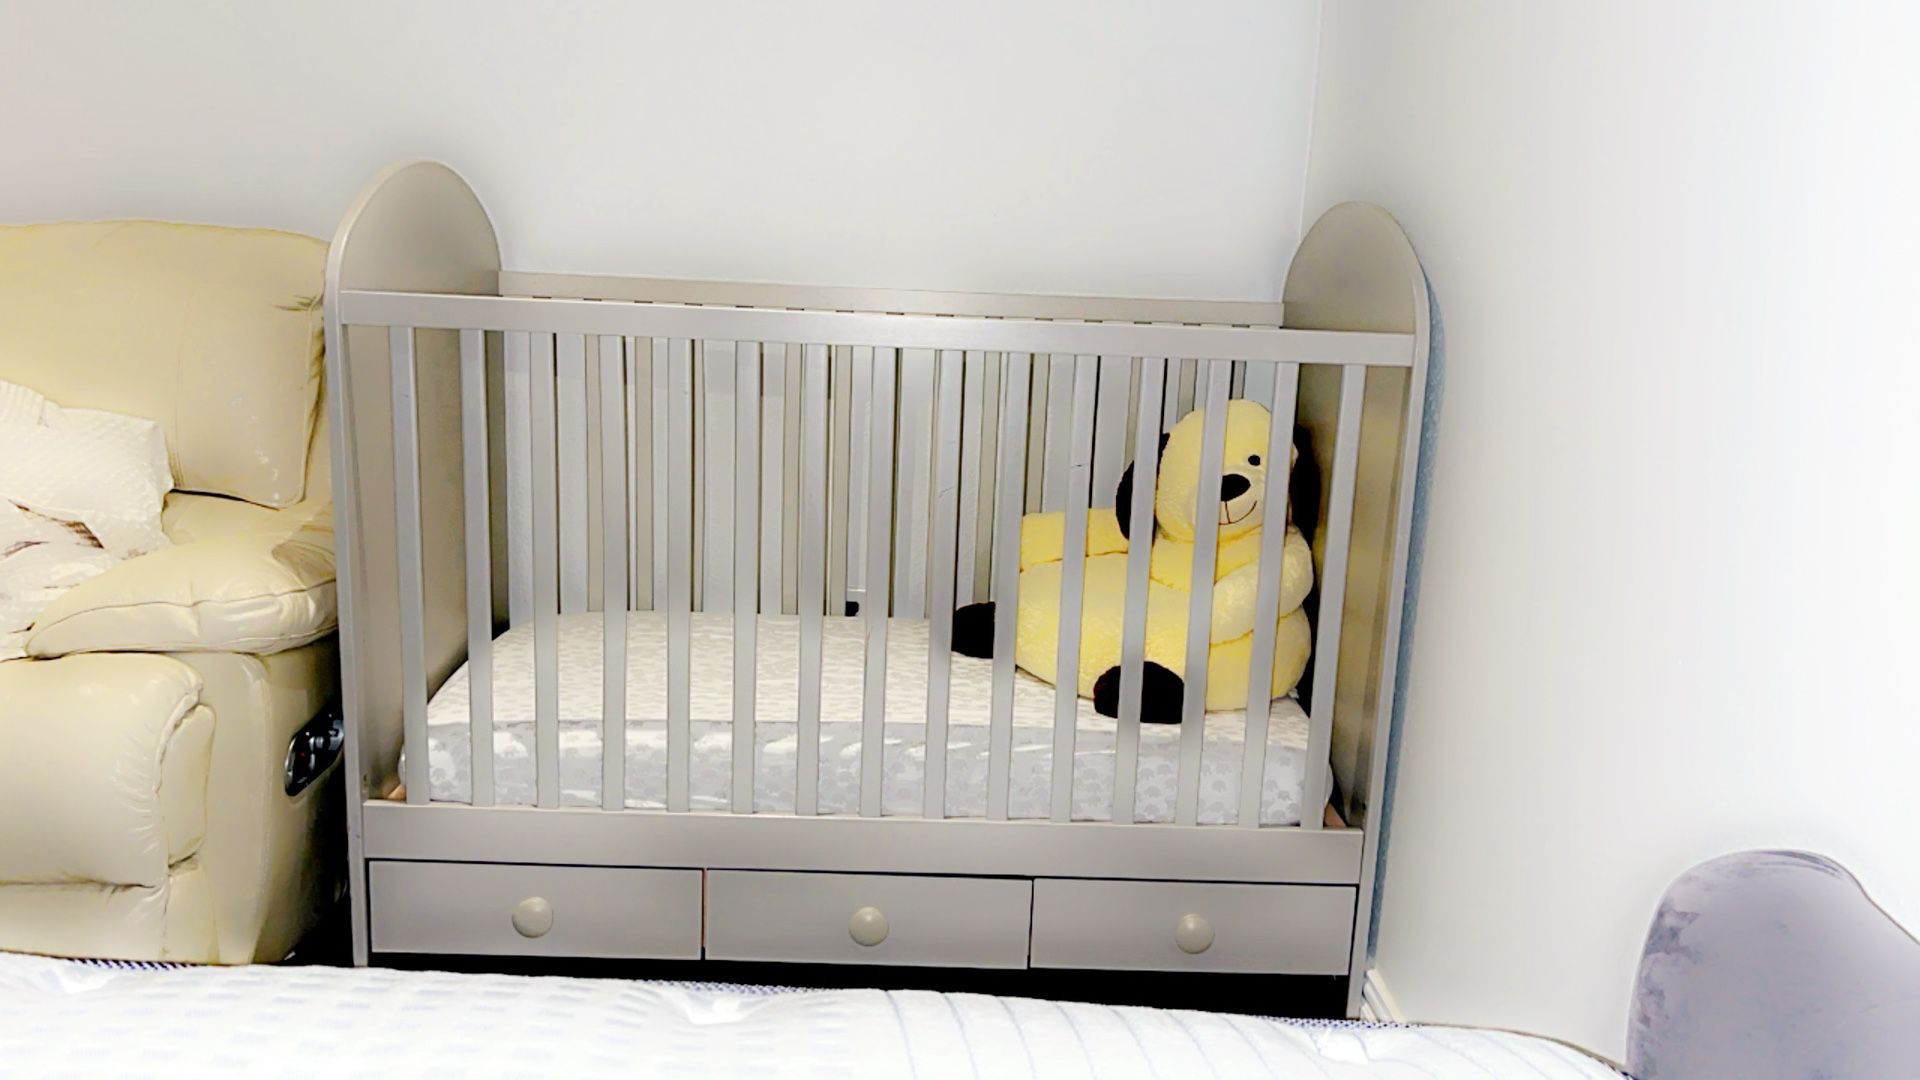 Never been used baby crib